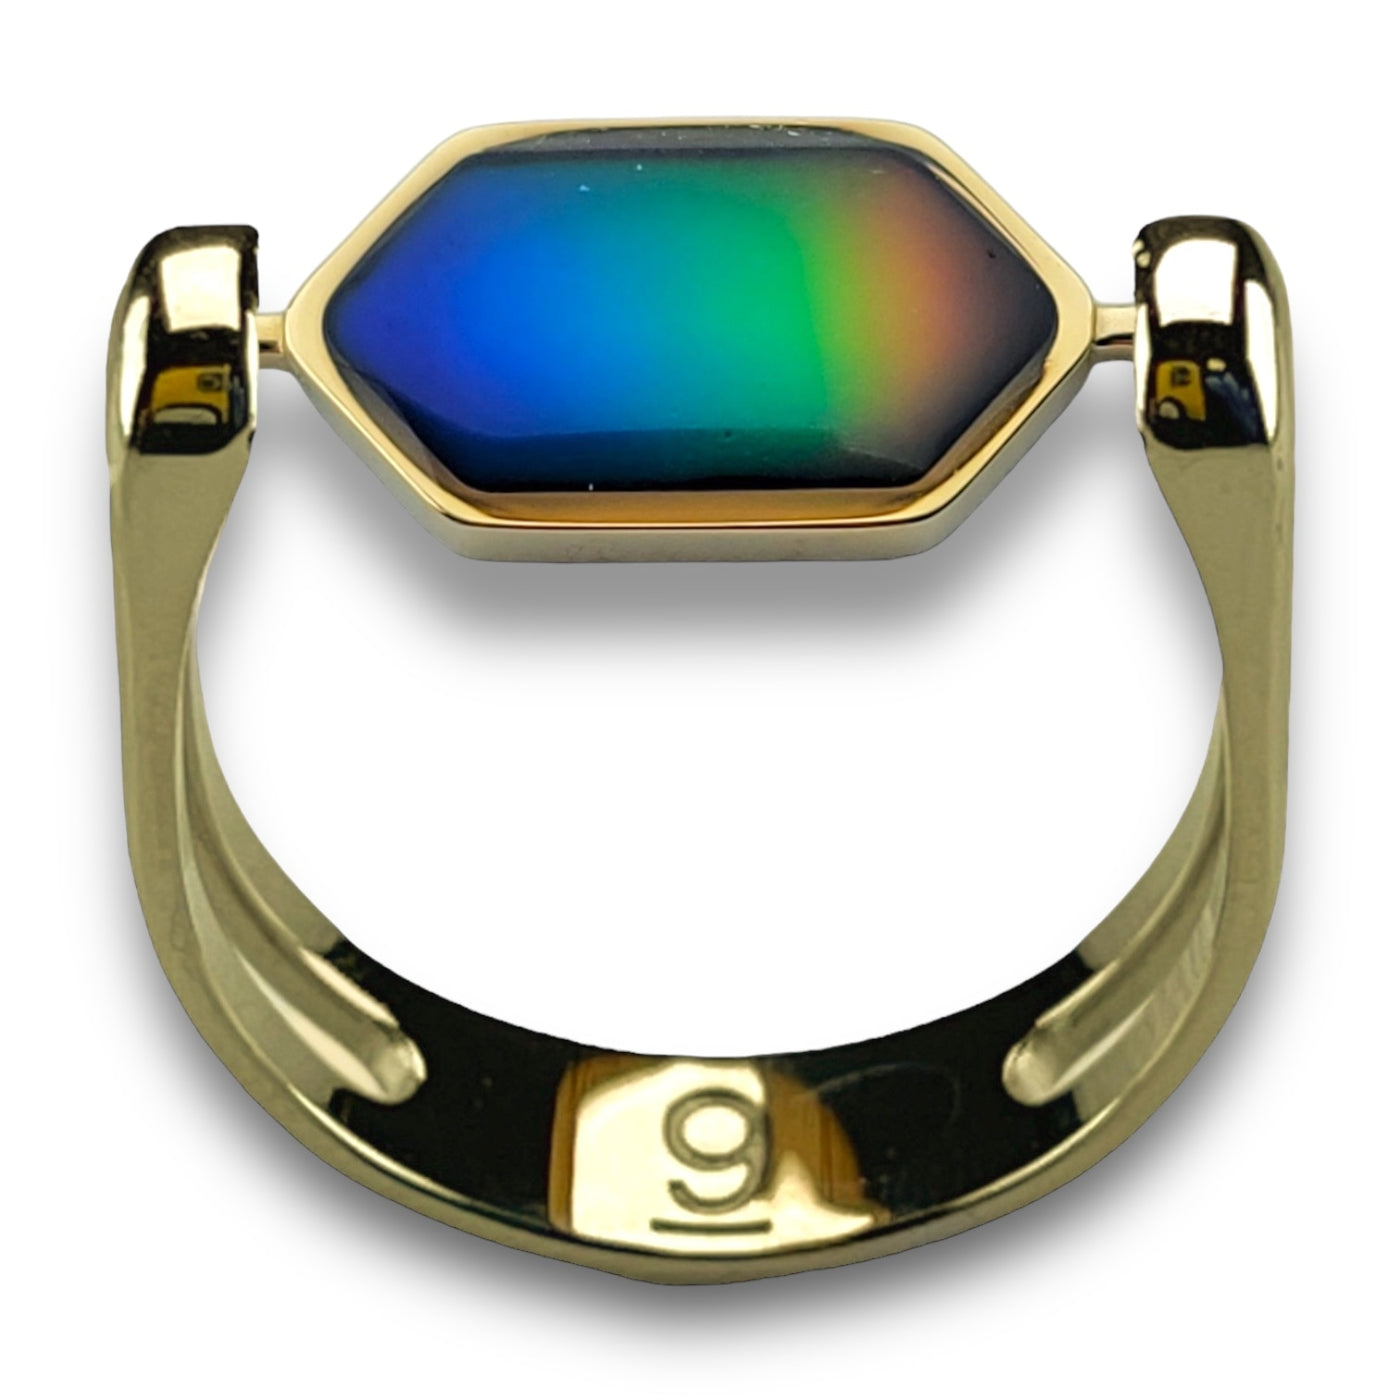 Mood Color-Changing Hexbar Fidget Ring for Anxiety